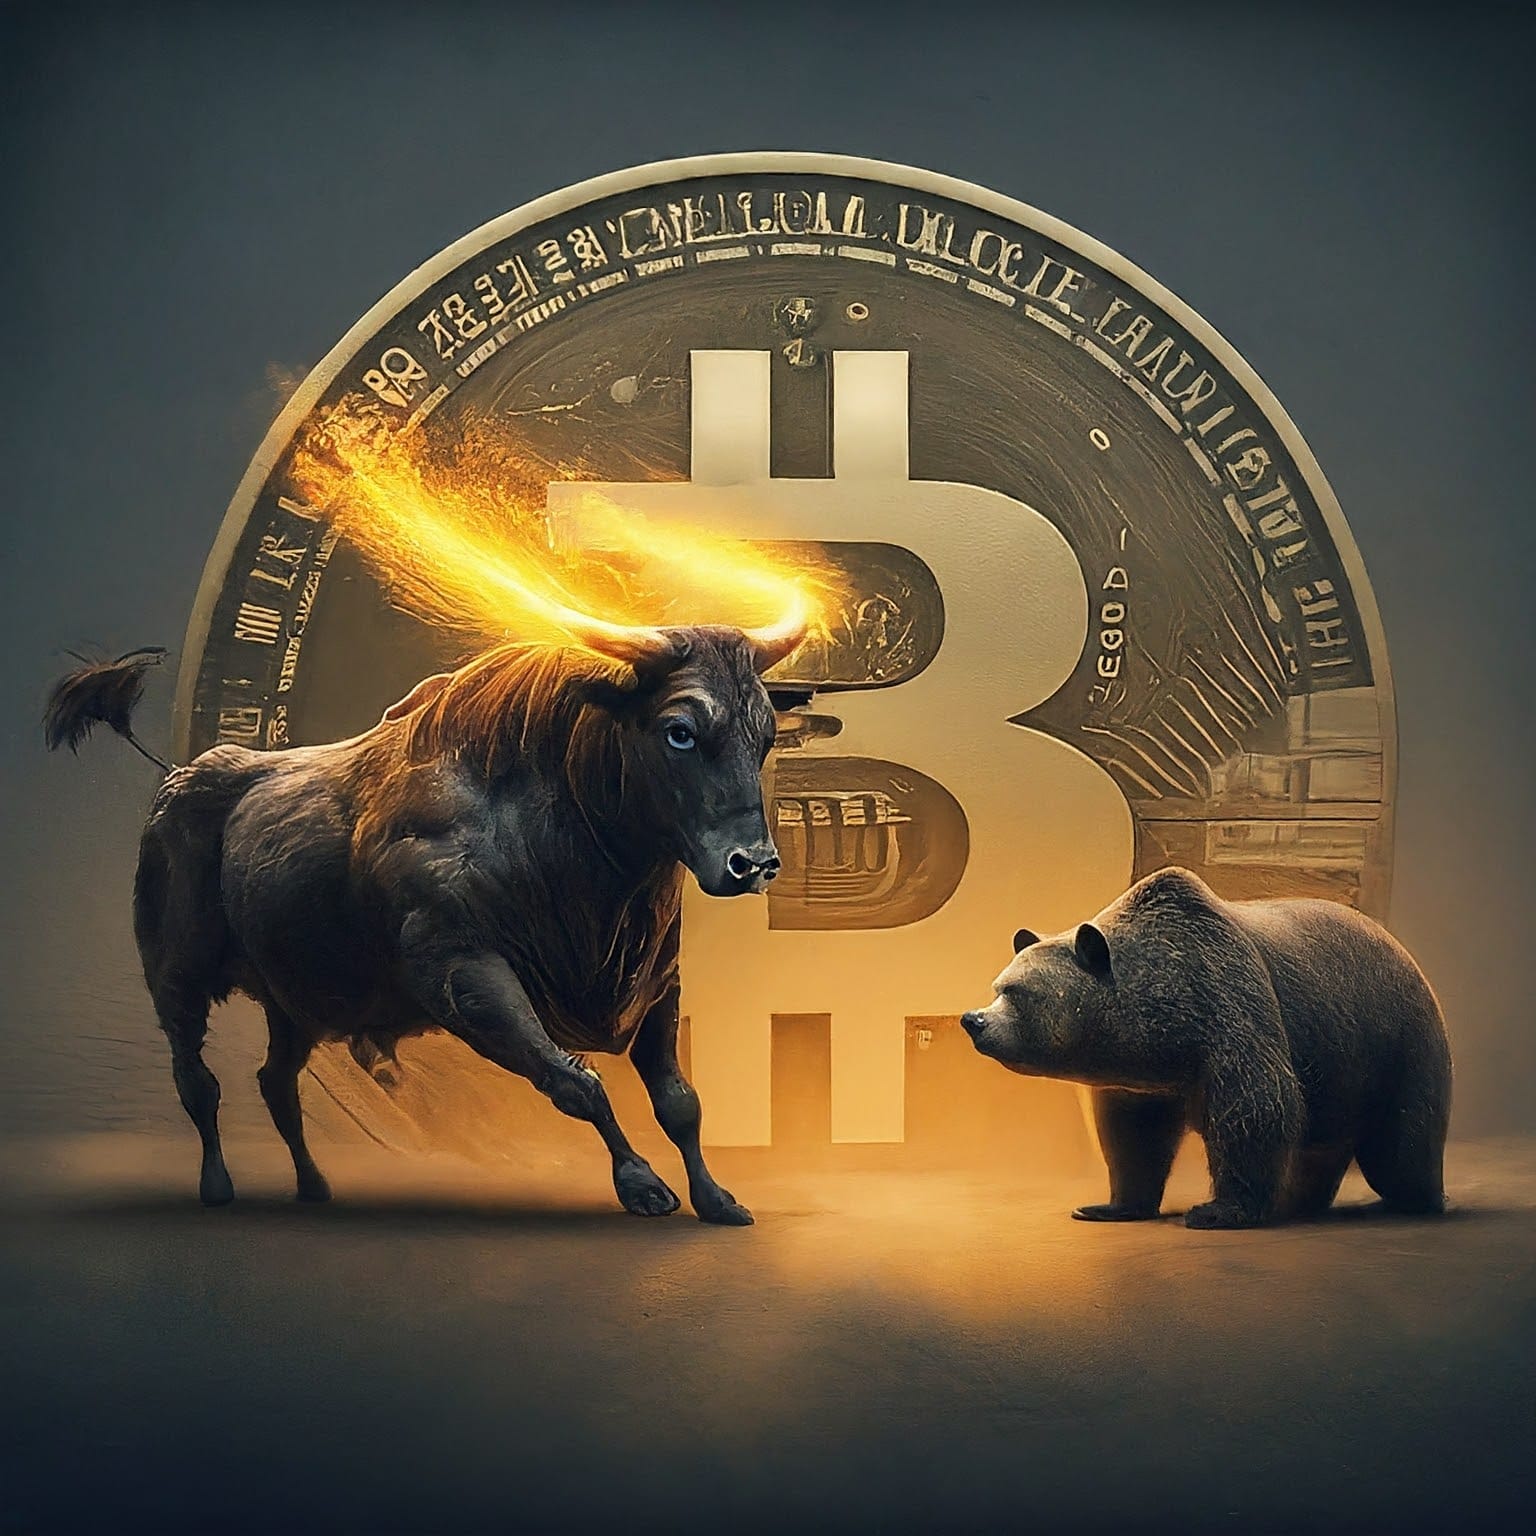 Brace Yourself: The 2024 Bitcoin Halving is Here